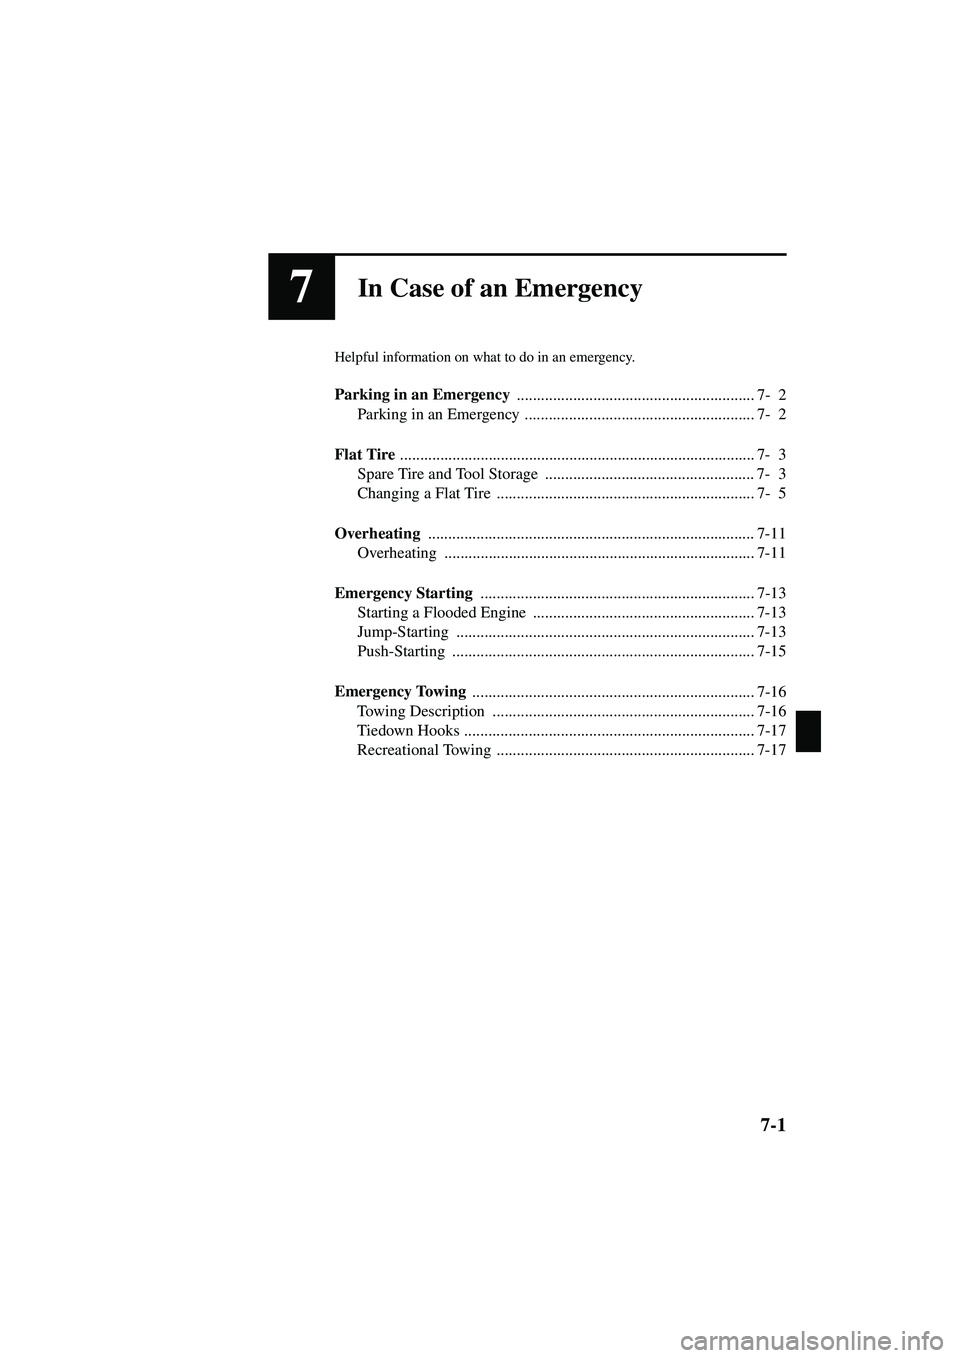 MAZDA MODEL MX-5 MIATA 2003  Owners Manual 7-1
Form No. 8R09-EA-02G
7In Case of an Emergency
Helpful information on what to do in an emergency.
Parking in an Emergency ........................................................... 7- 2
Parking in